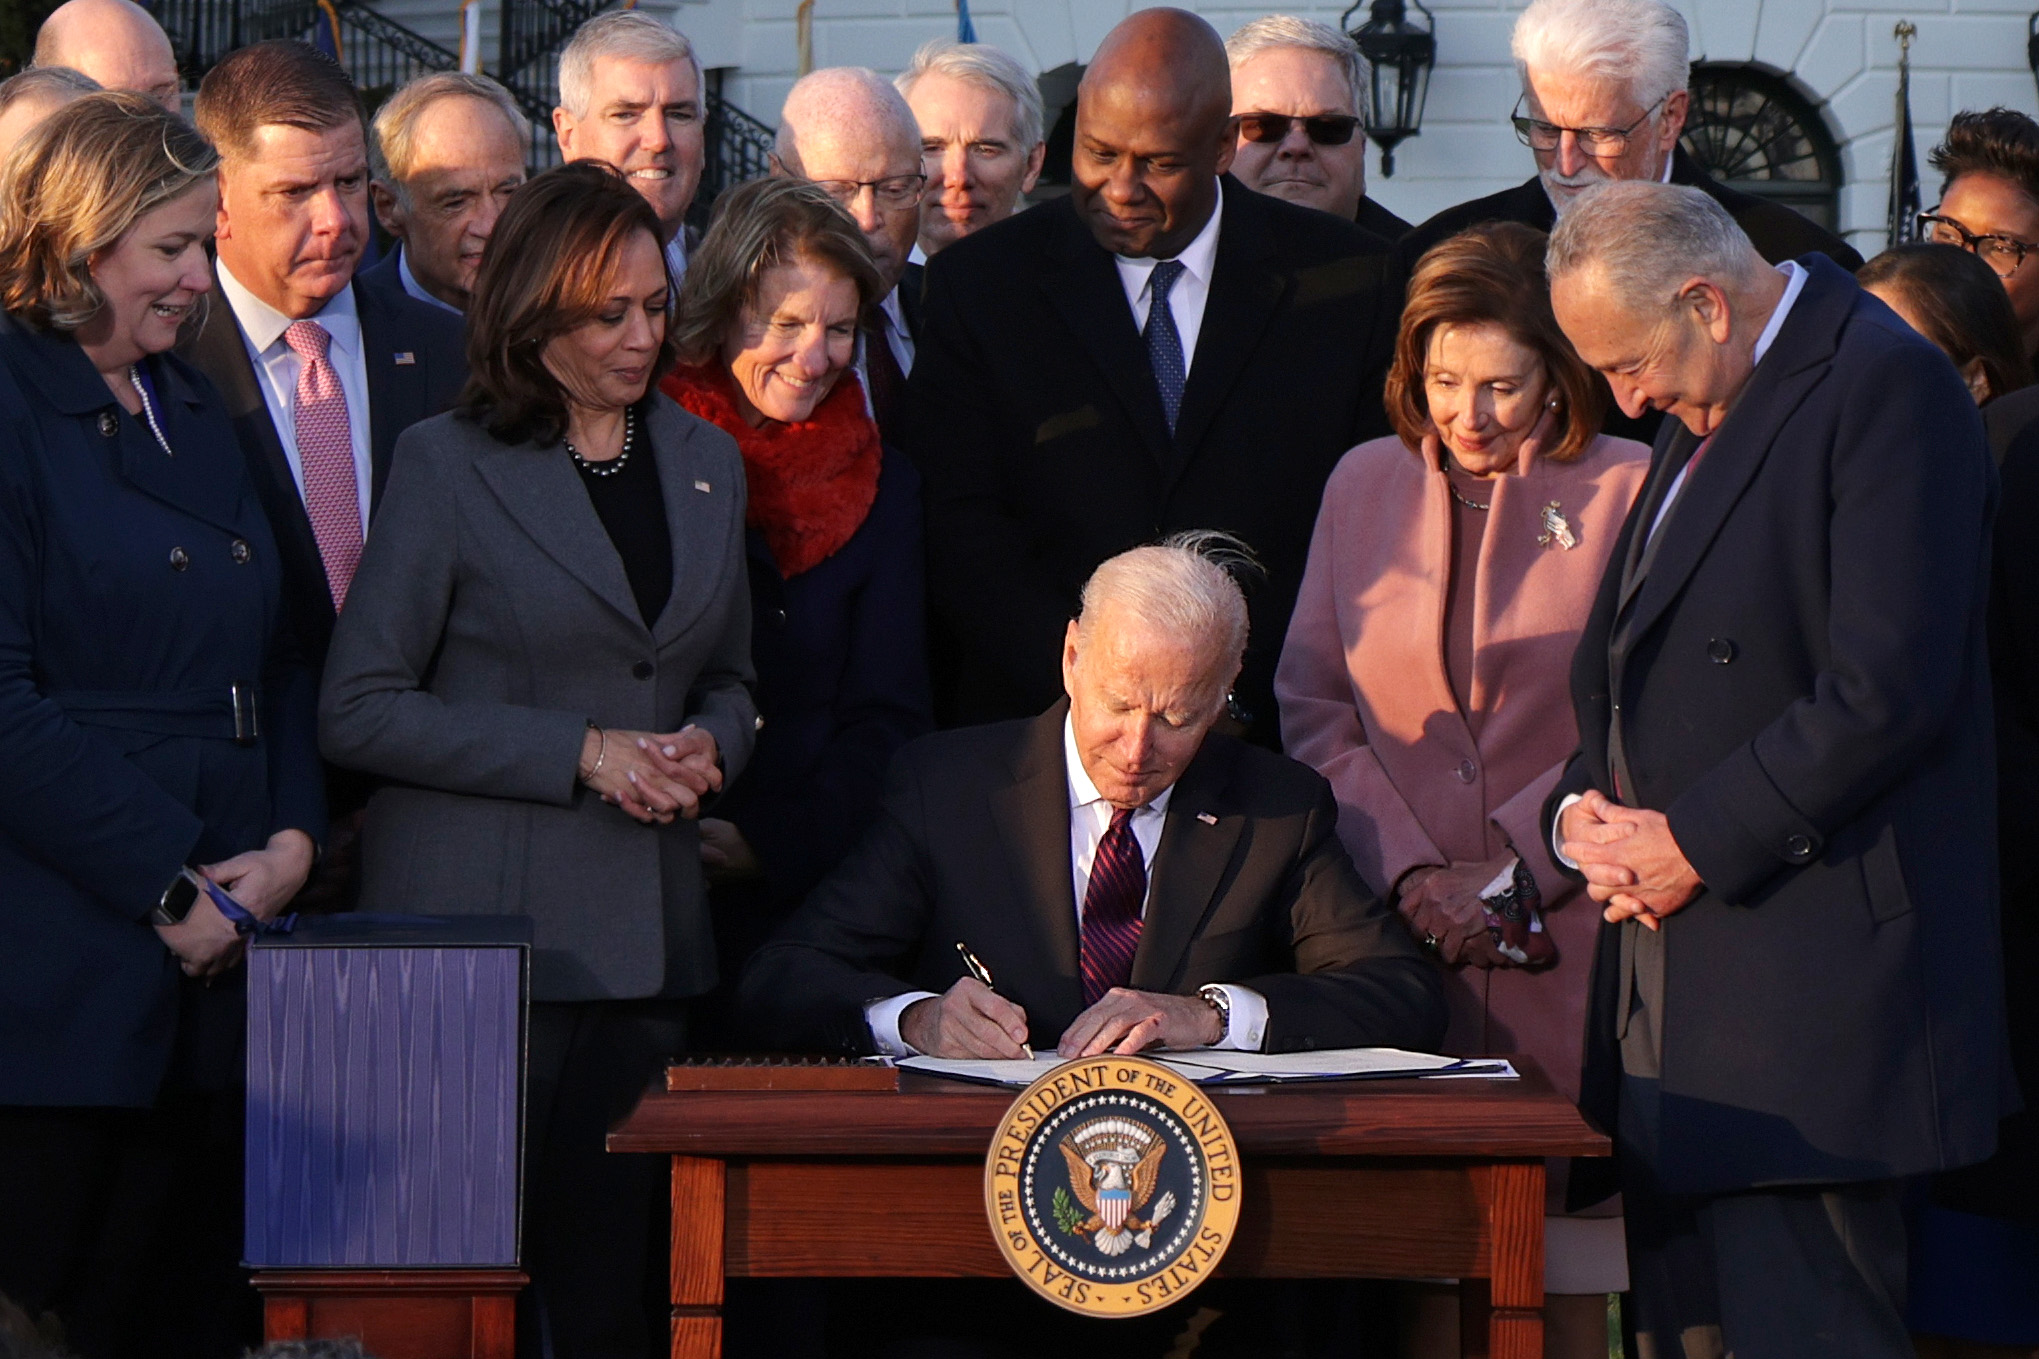 The moment the Biden infrastructure bill was signed into law